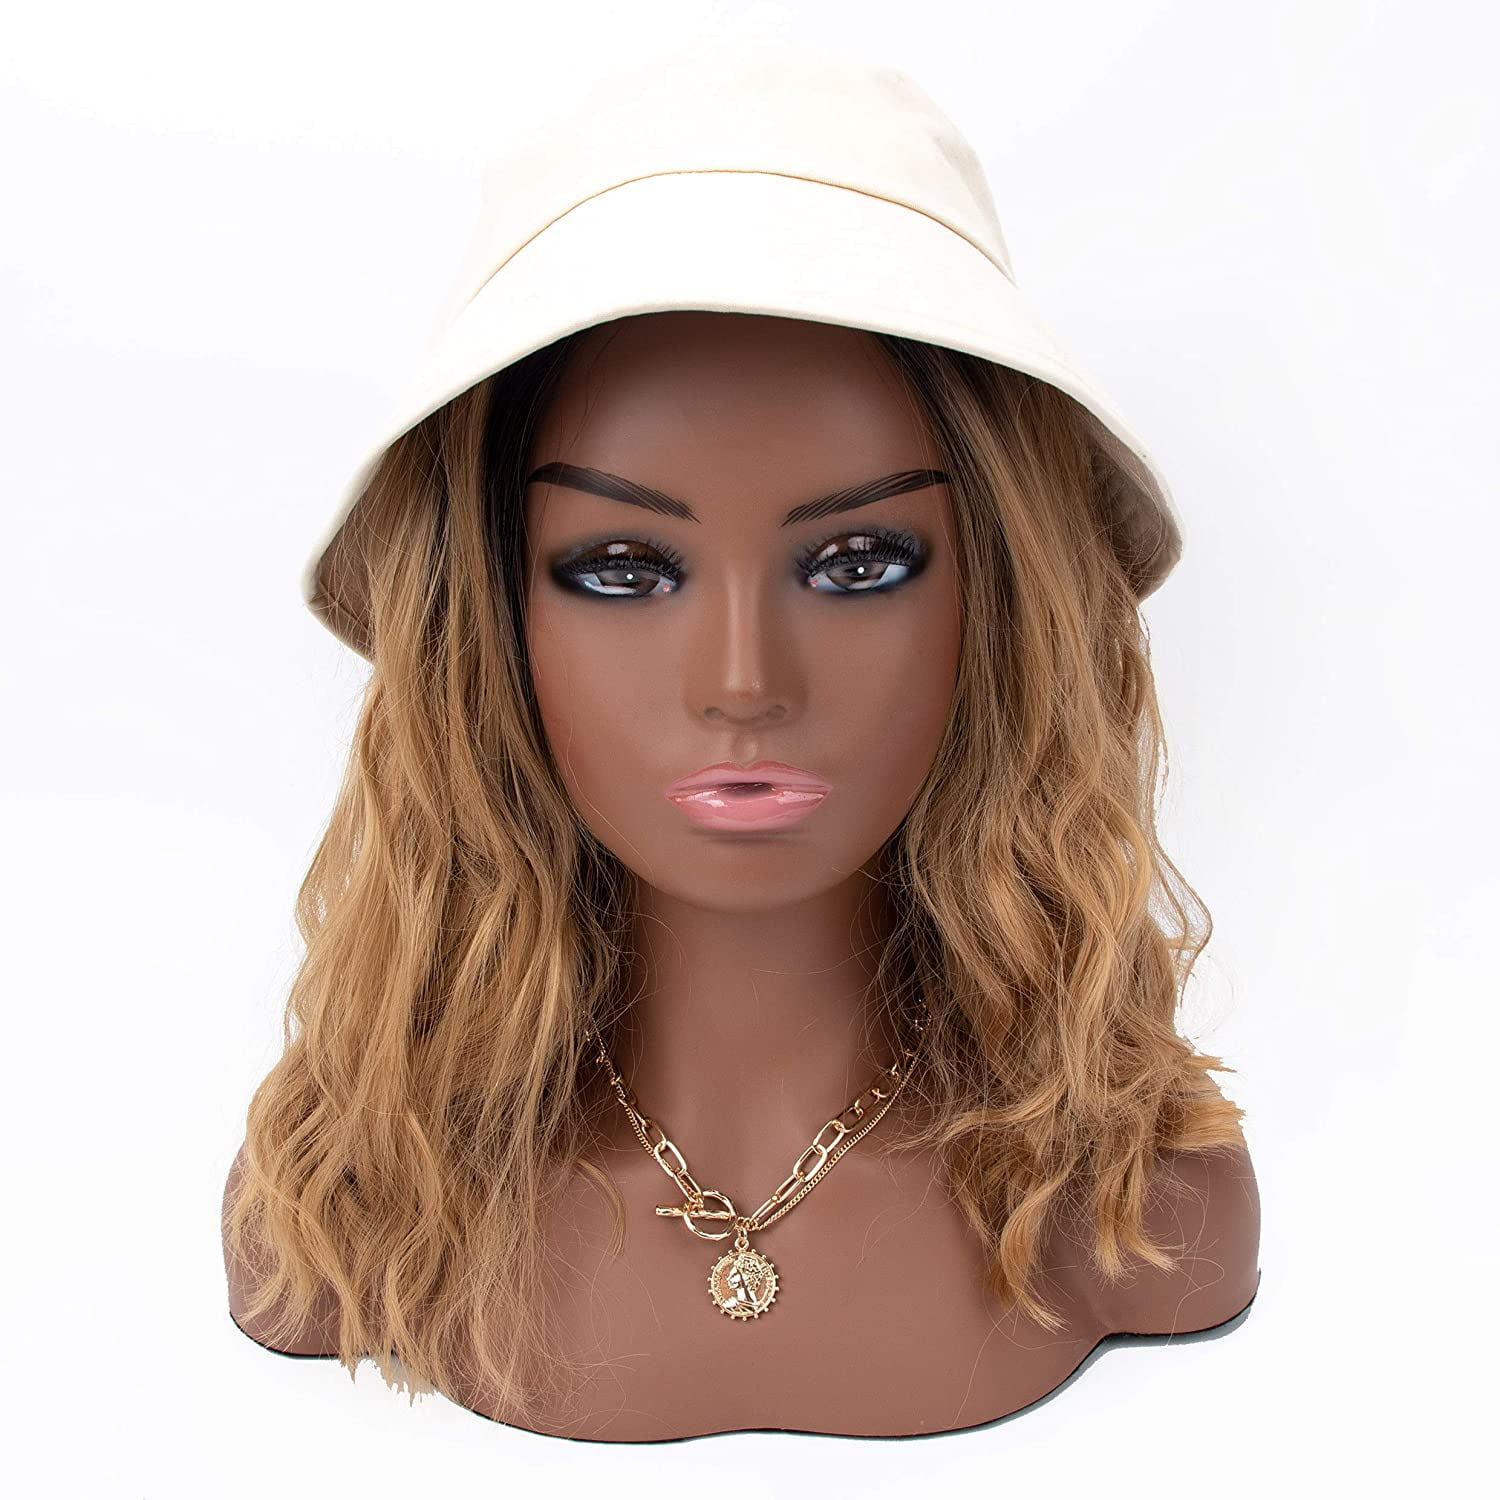 L7 Mannequin New Style Manikin Head PVC Realistic Mannequin Head Bust Wig Head Stand for Wigs Making Styling Wig Cap Earring Necklace Jewelry Display 